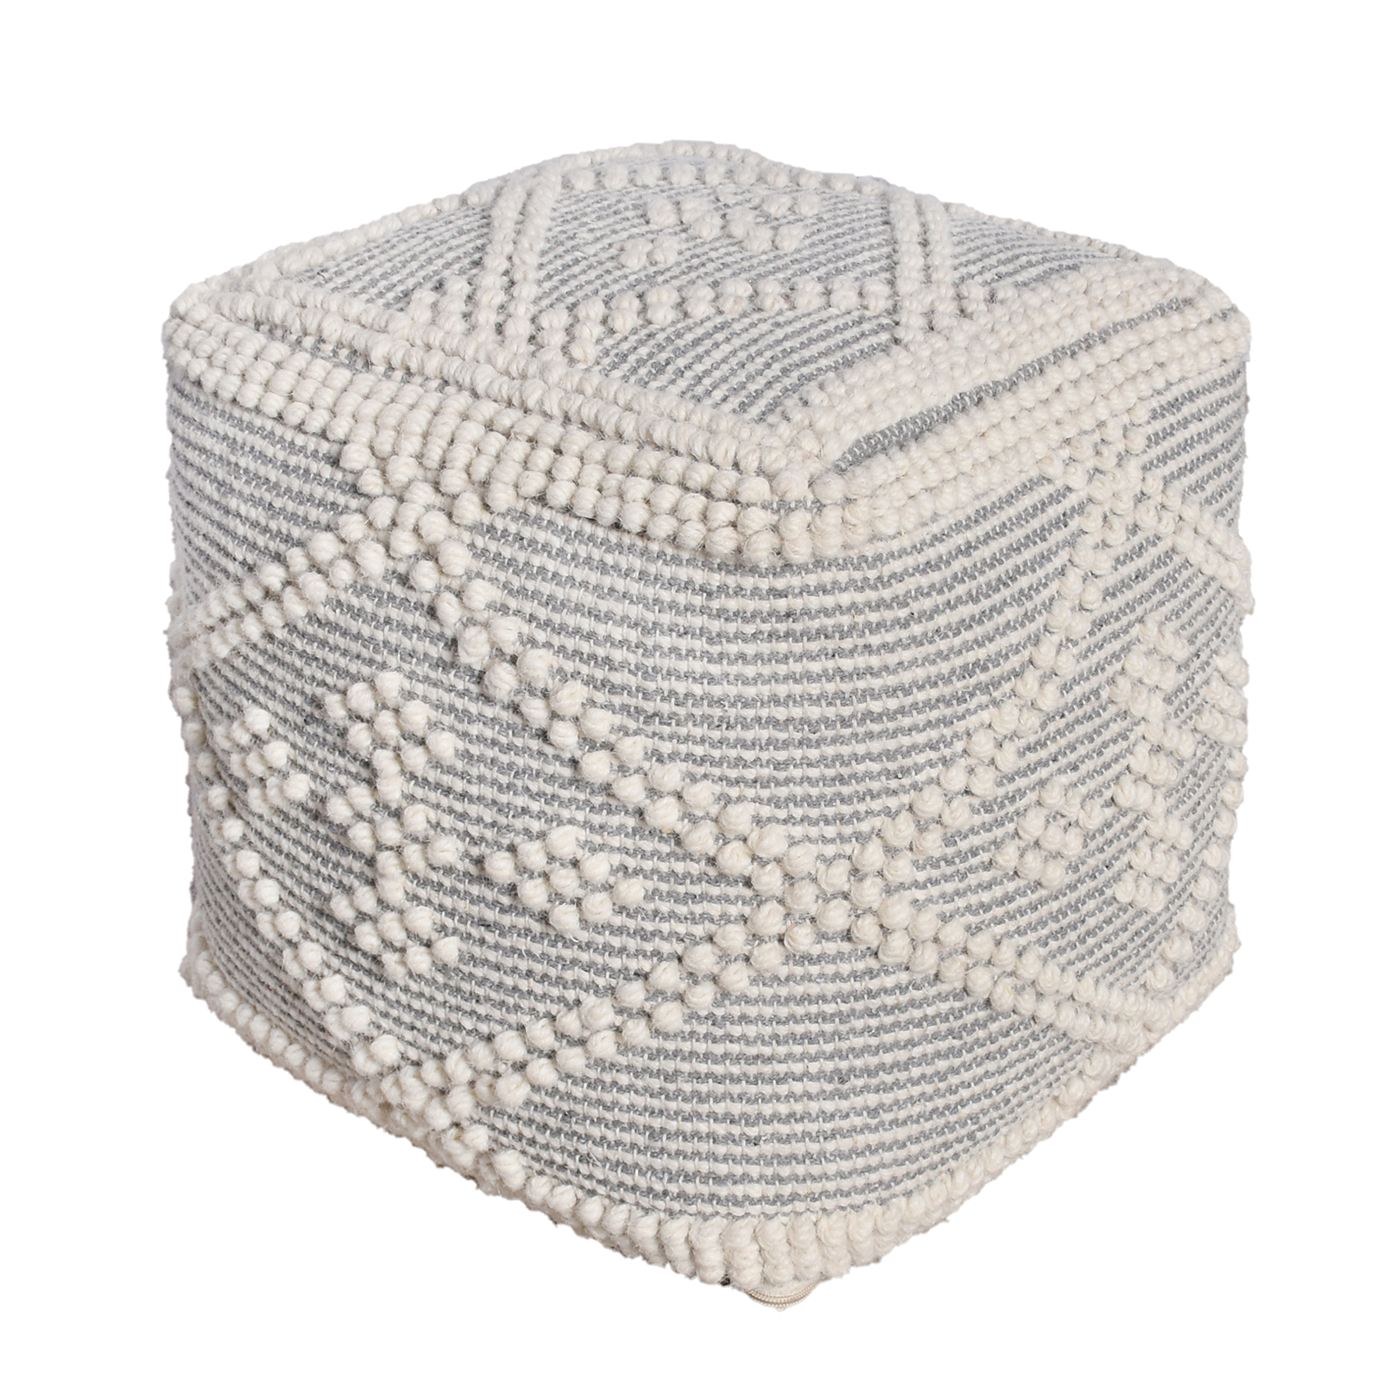 Cottian Pouf, Wool, Natural White, Grey, Pitloom, All Loop